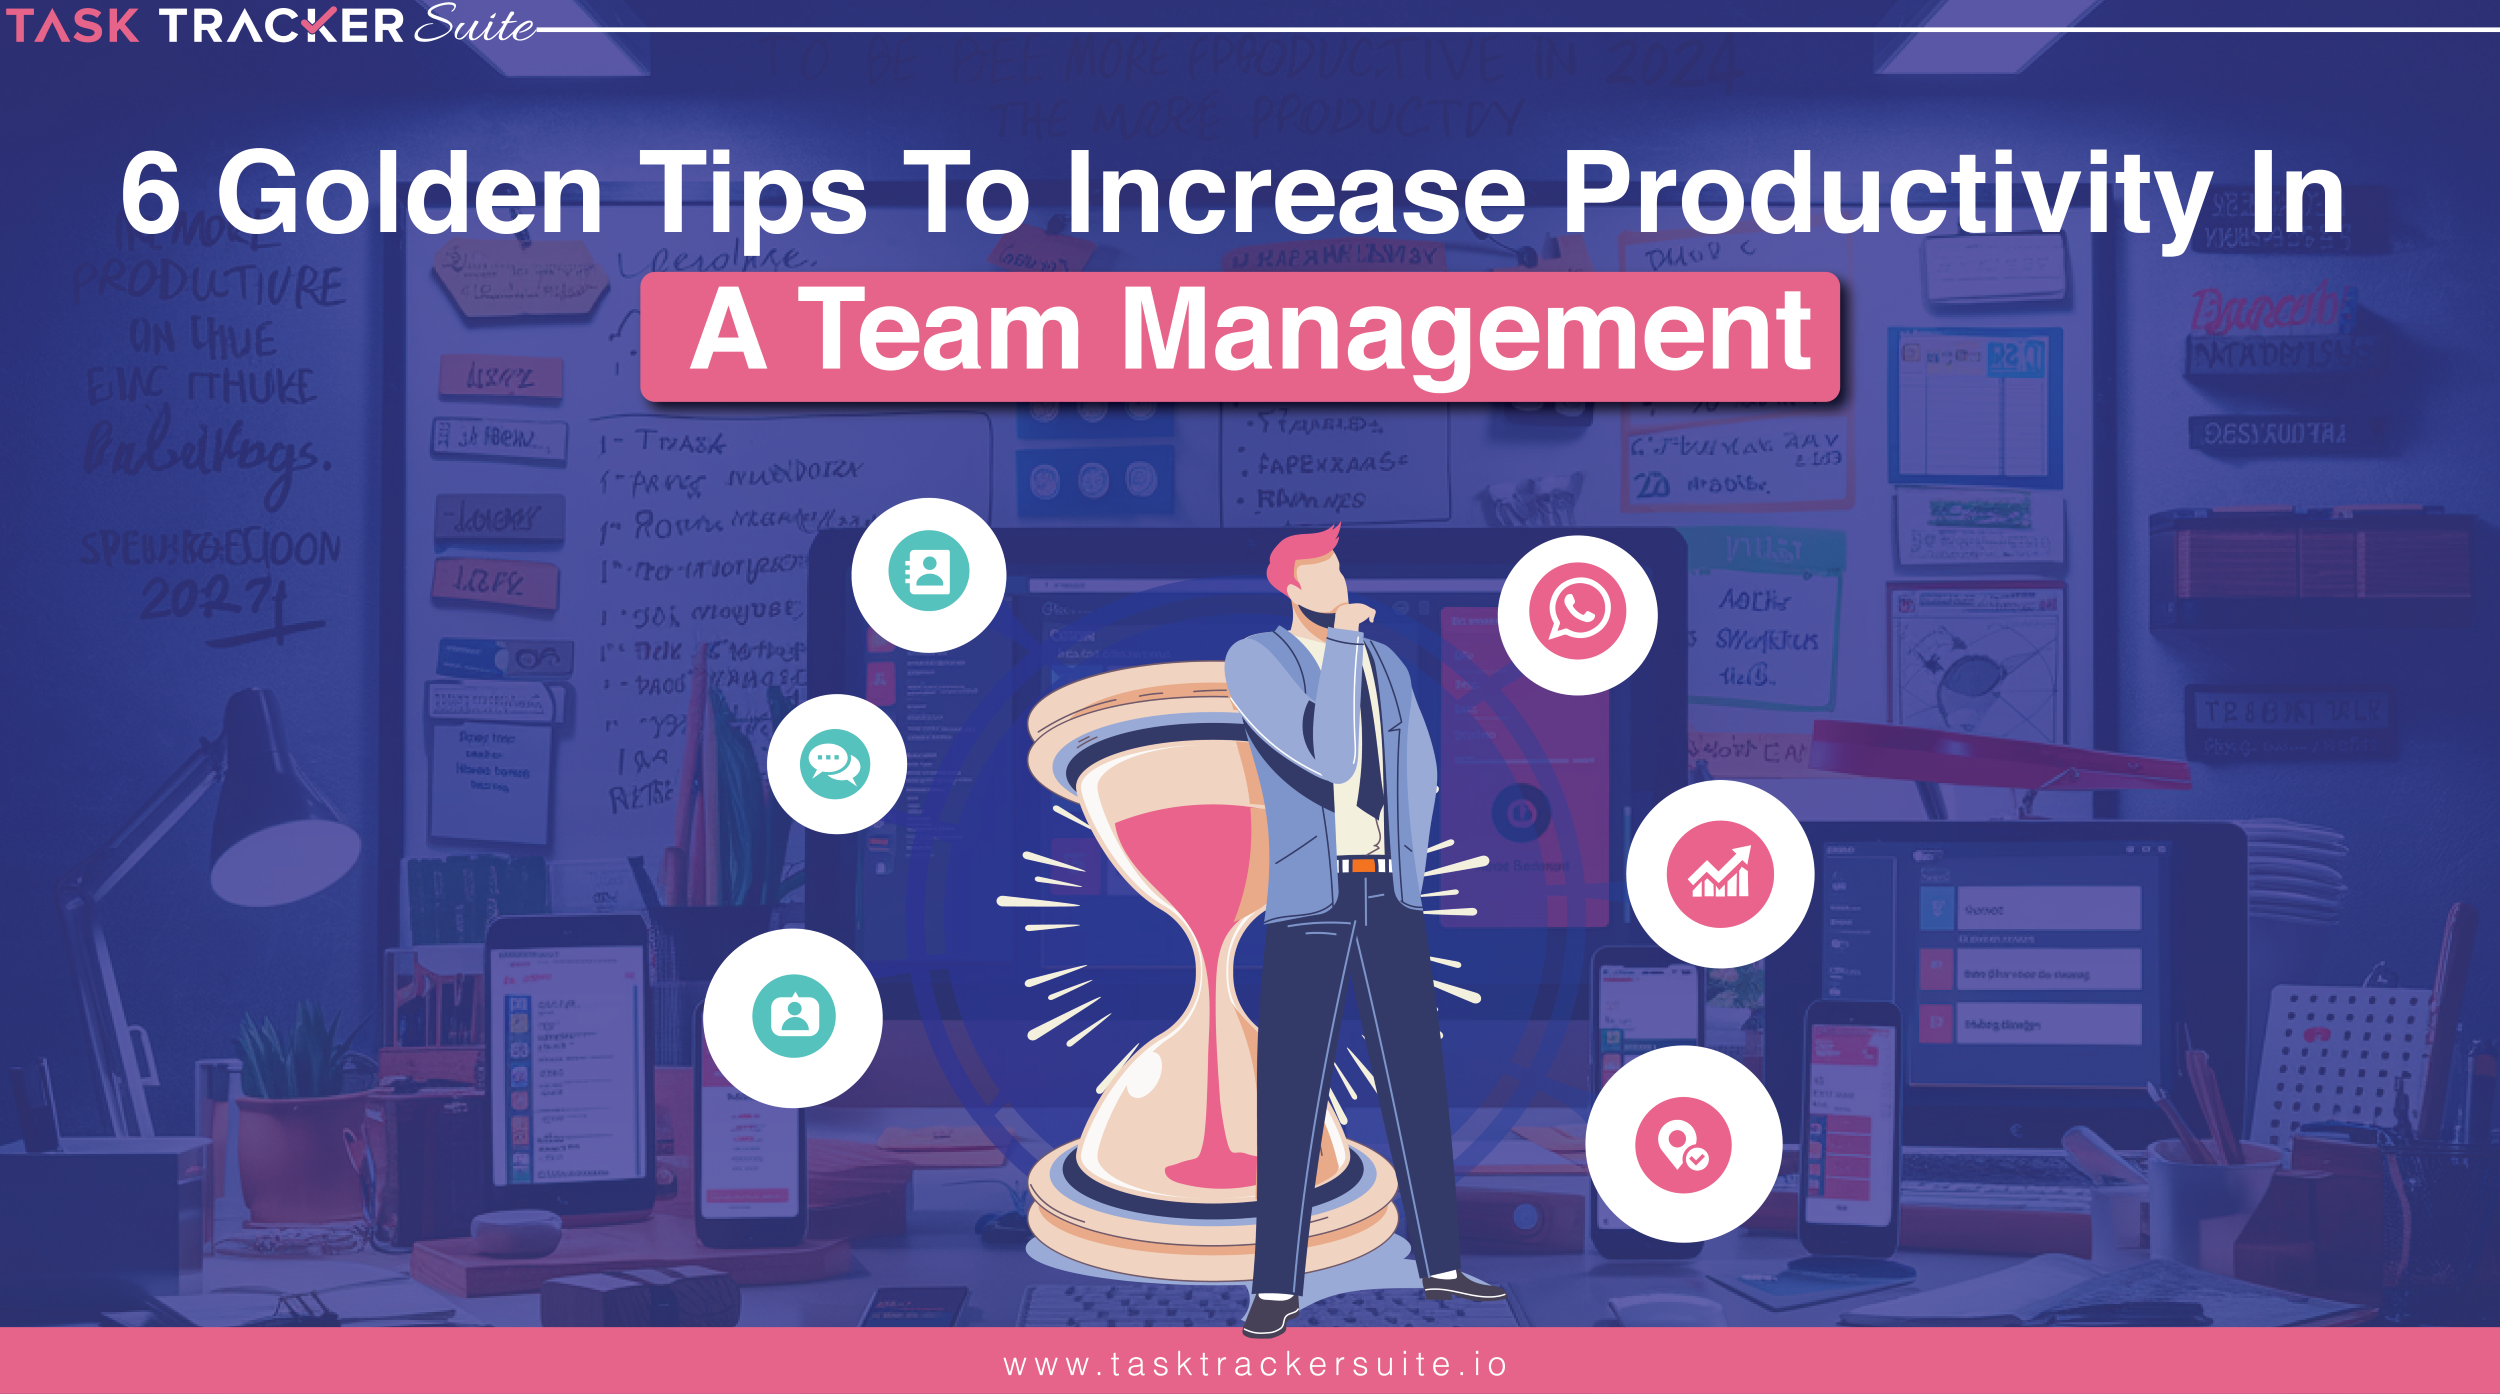 6 Golden Tips To Increase Productivity In A Team Management